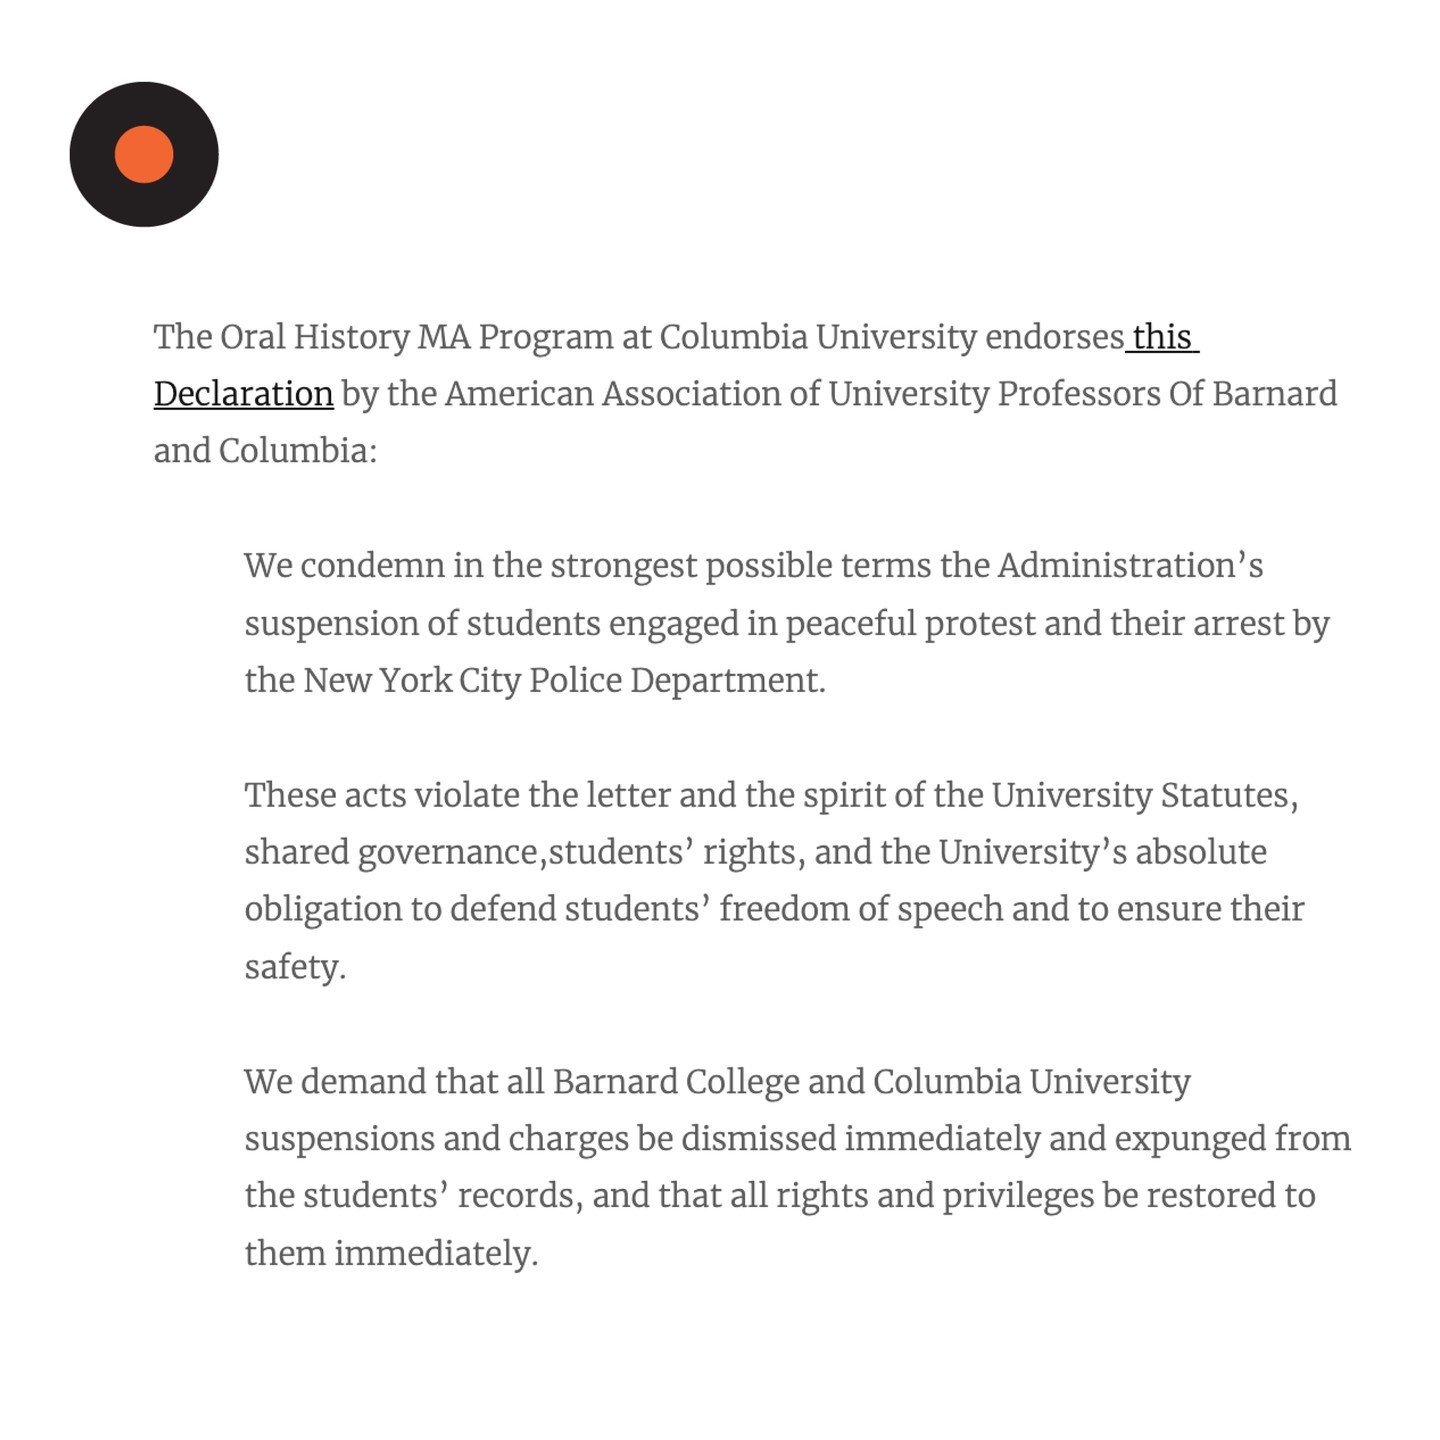 A statement from OHMA and OHMA's advisory board: 

The Oral History MA Program at Columbia University endorses this Declaration by the American Association of University Professors Of Barnard and Columbia:

We condemn in the strongest possible terms 